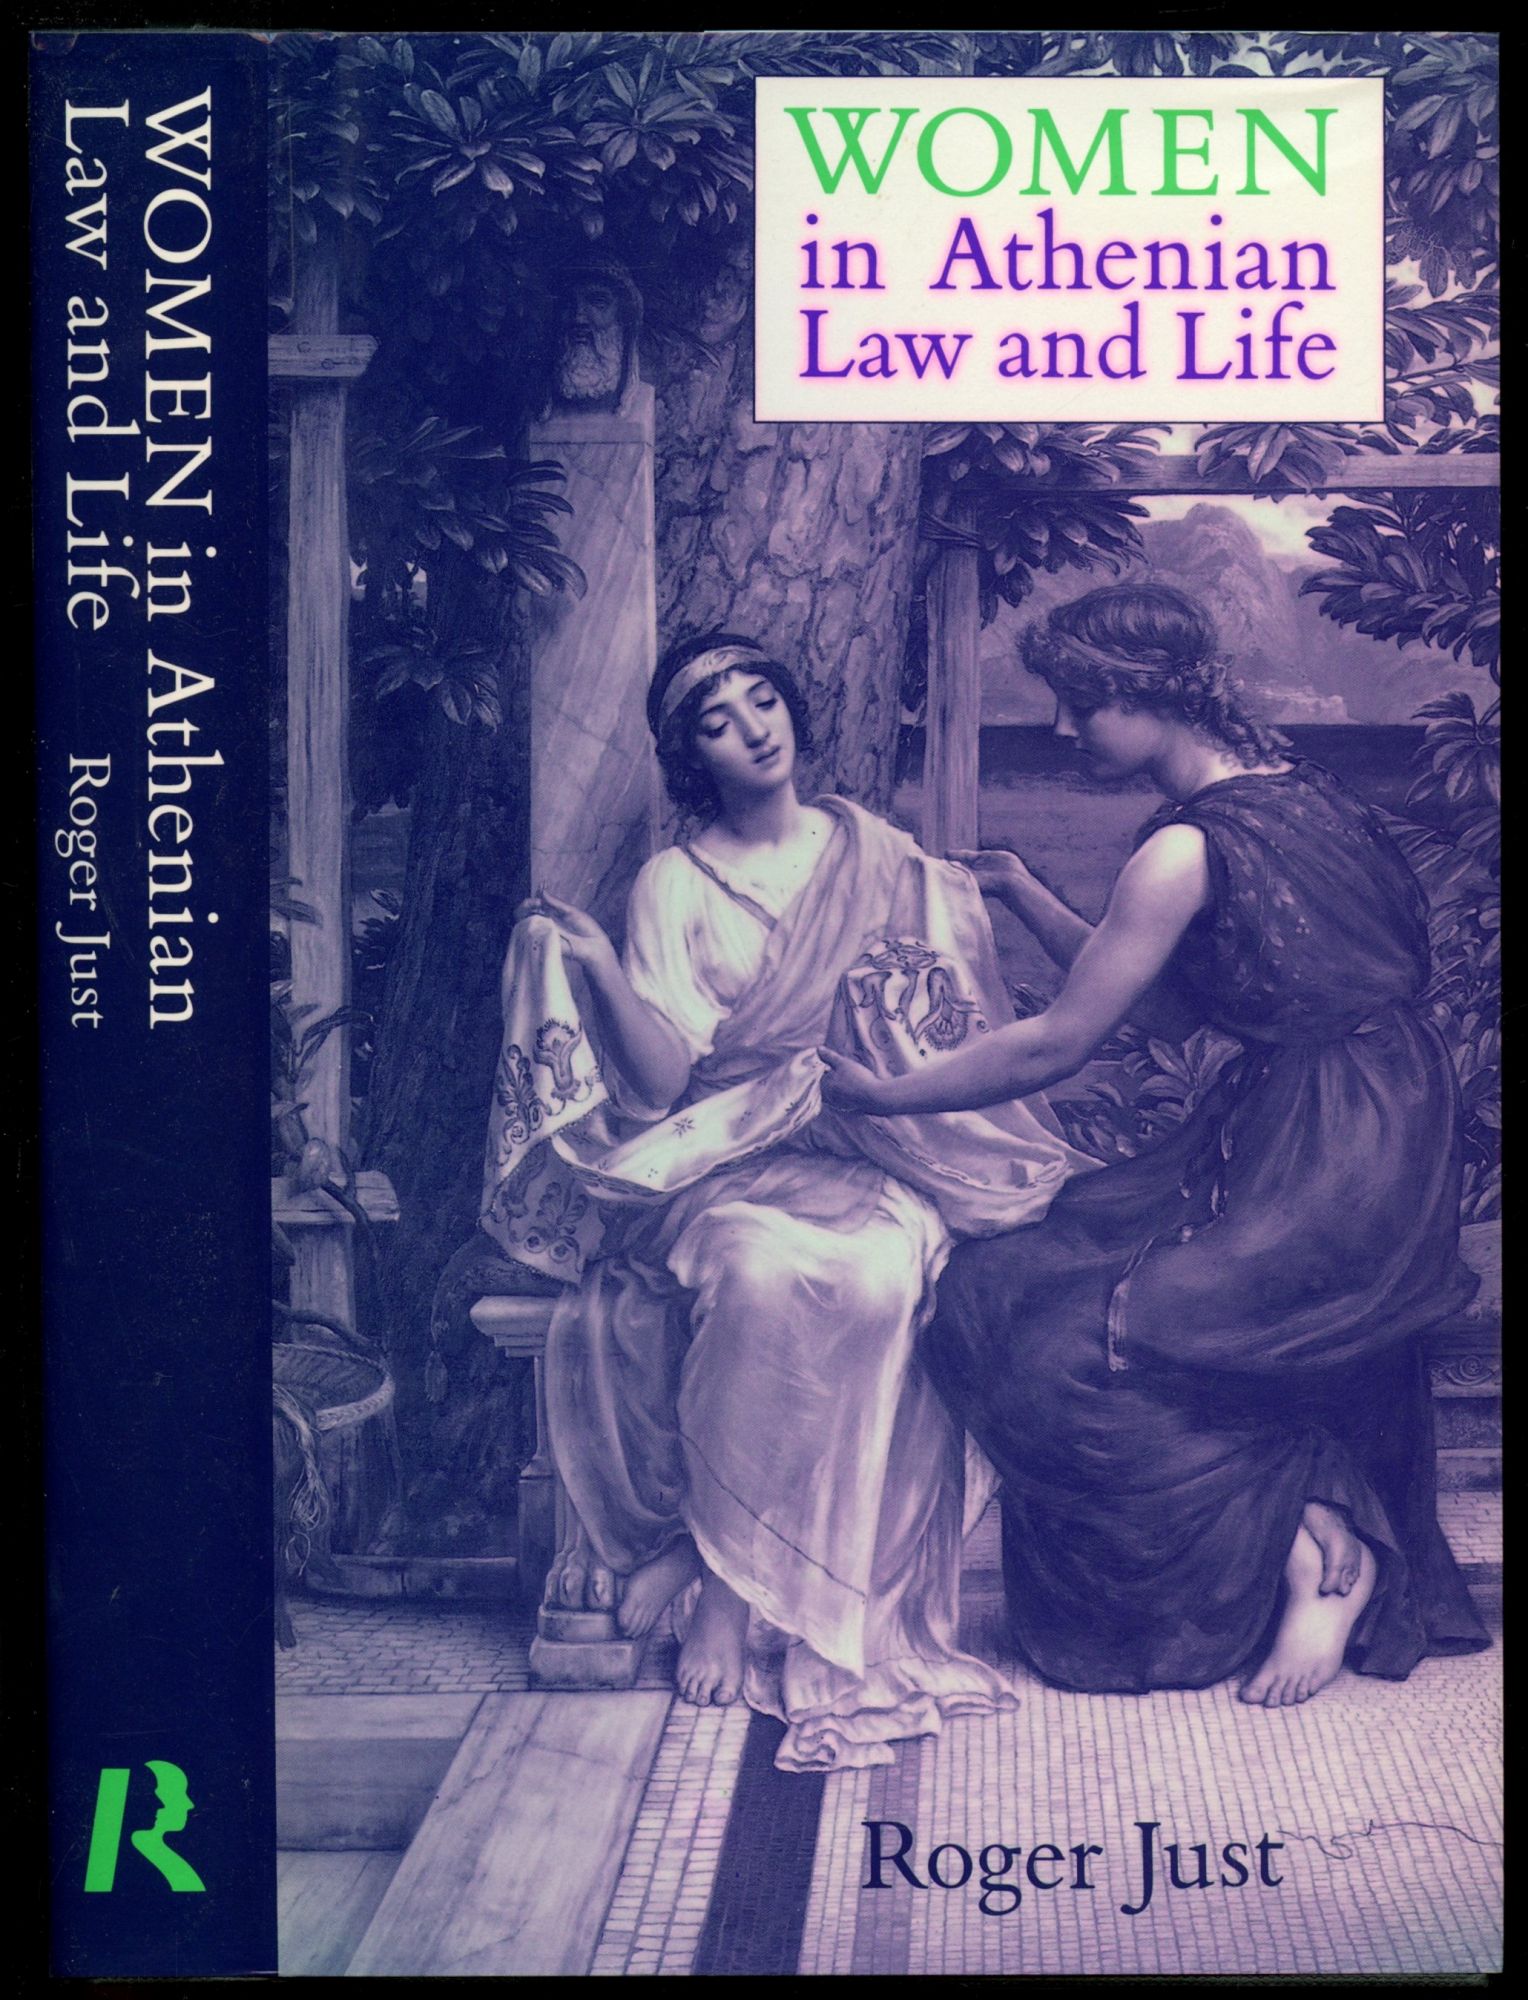 Women in Athenian Law and Life by Roger Just on Common Crow Books